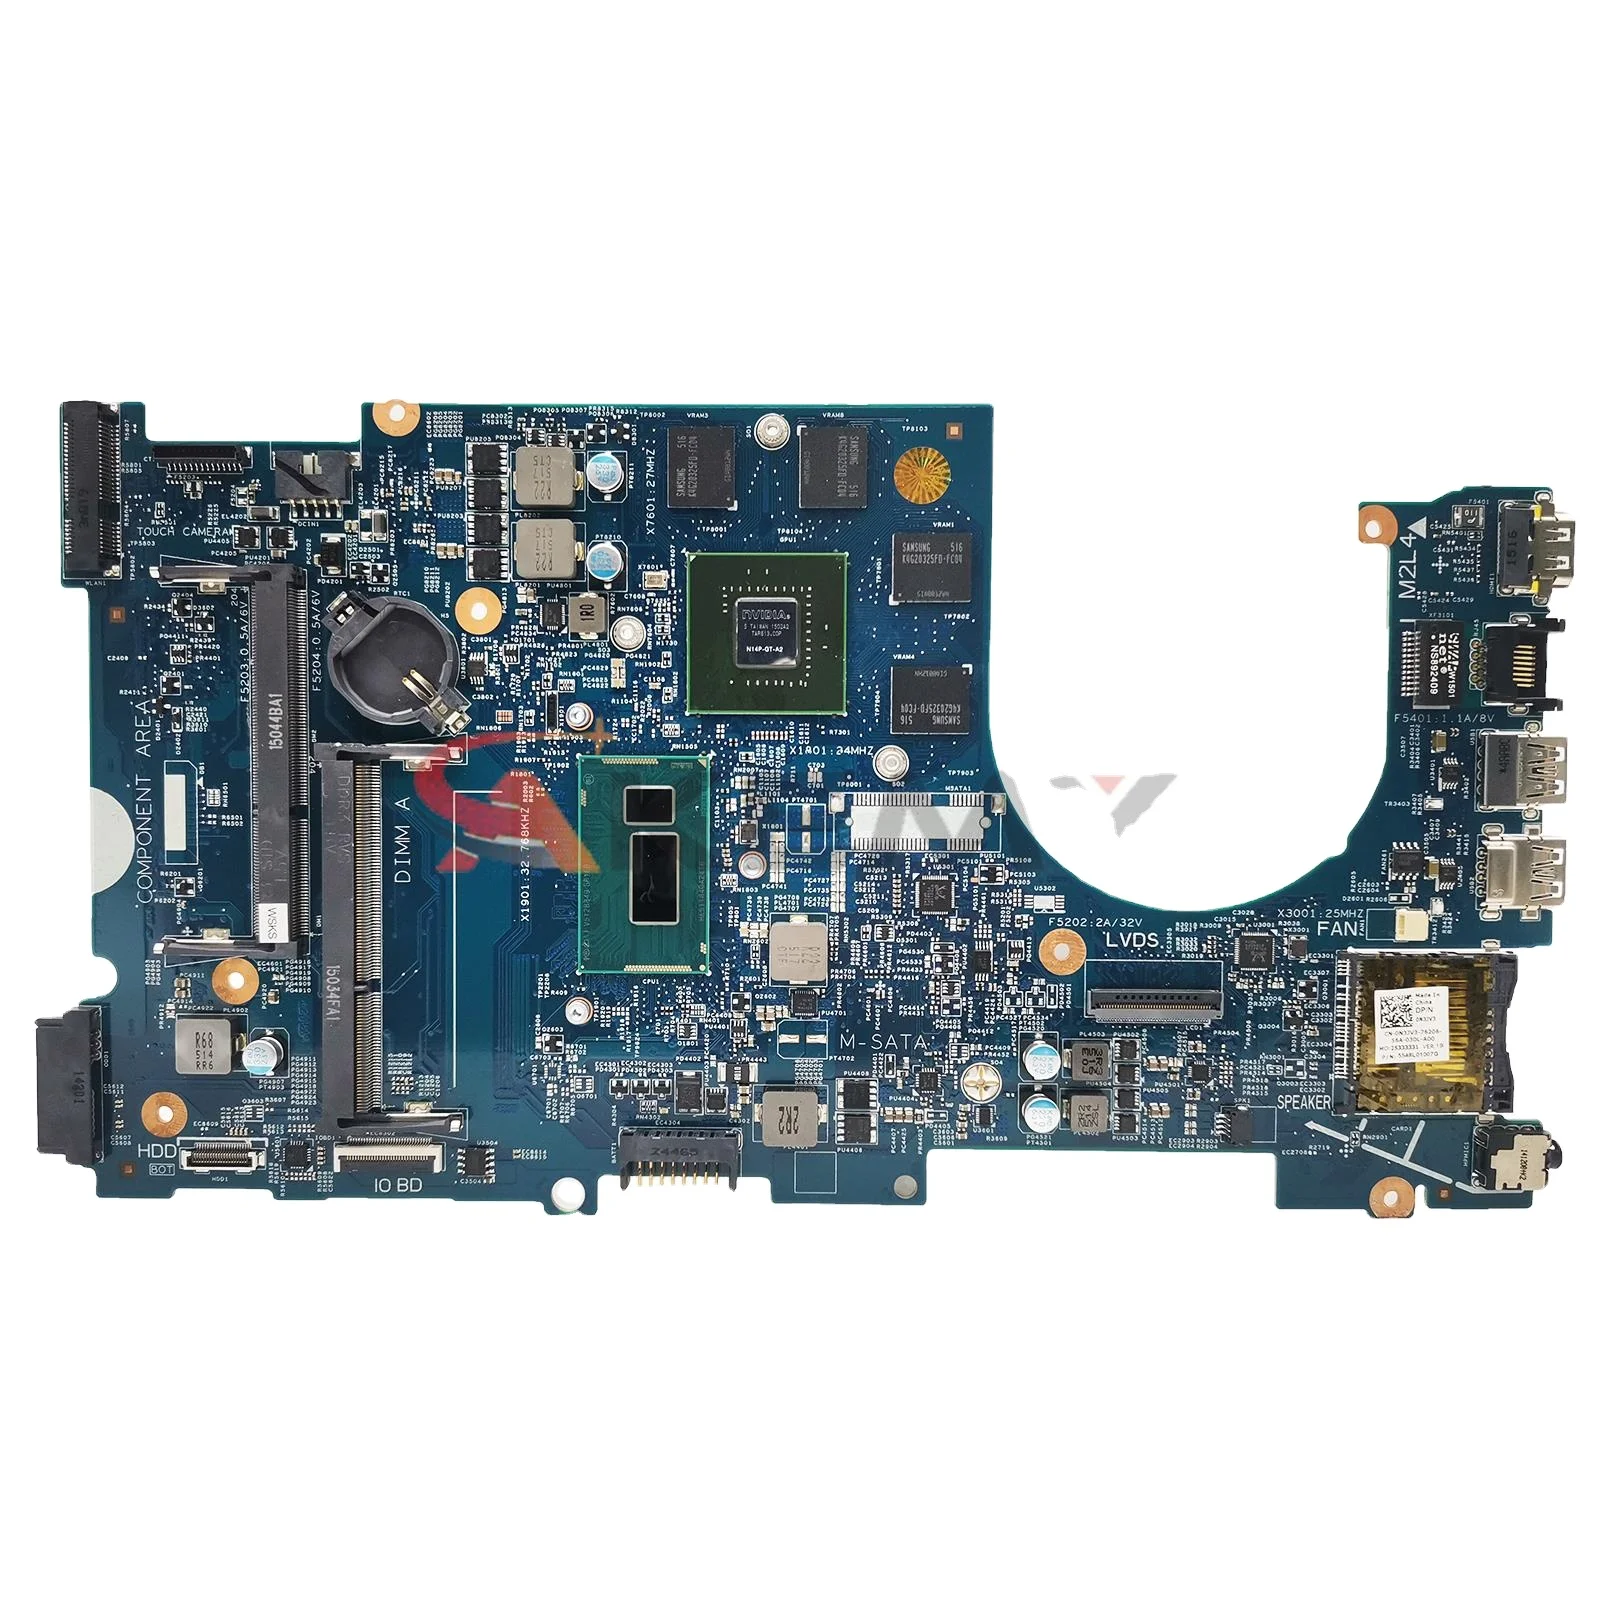 

FOR Dell Inspiron 17 7737 Laptop Motherboard 12309-1 CN-0N3JV3 CN-0NC2TM mainboard with i5 i7 4th Gen CPU GT750M